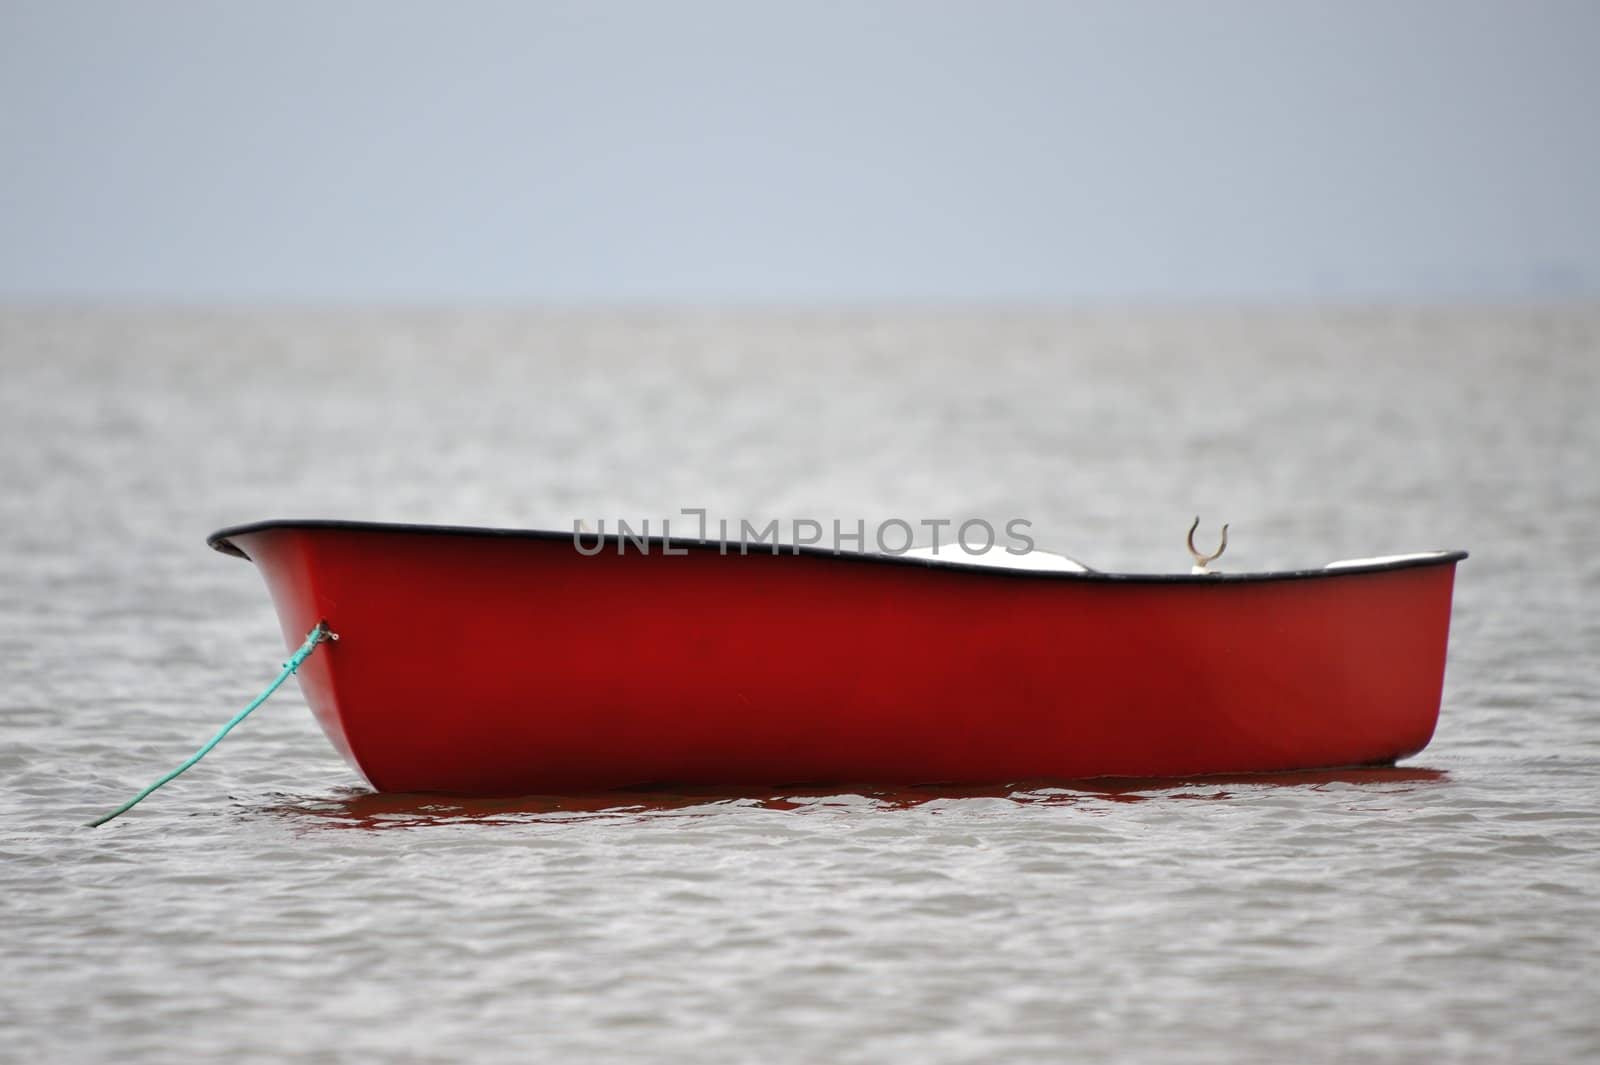 A lonely red boat on the sea.